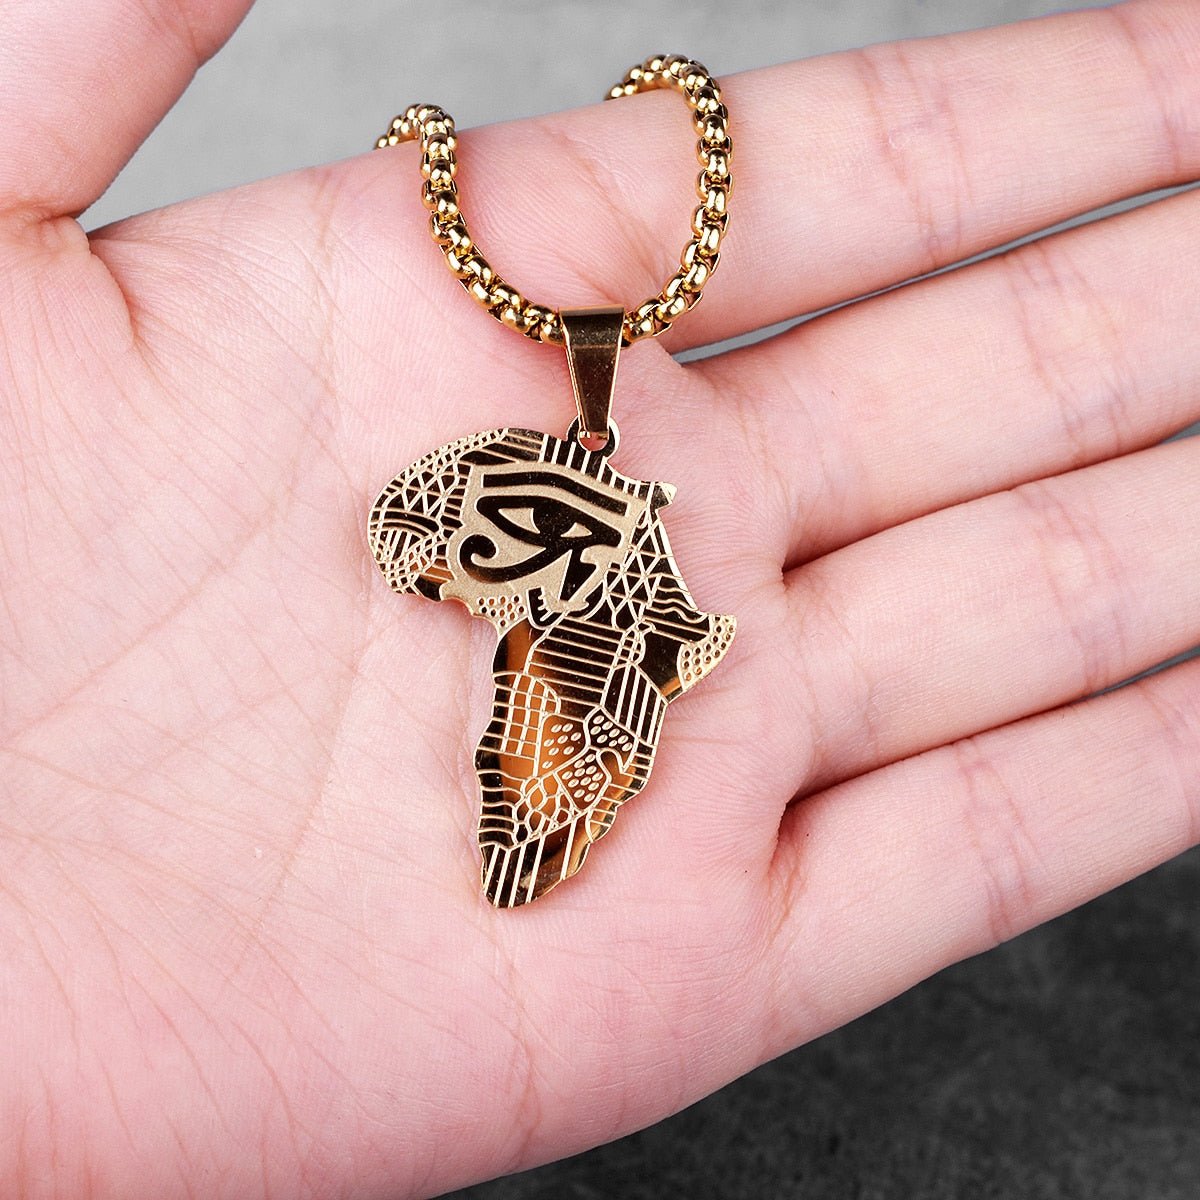 Golden Safari: Bold Africa Map Necklace for Men Stainless Steel Pendant Chain - Flexi Africa - Flexi Africa offers Free Delivery Worldwide - Vibrant African traditional clothing showcasing bold prints and intricate designs